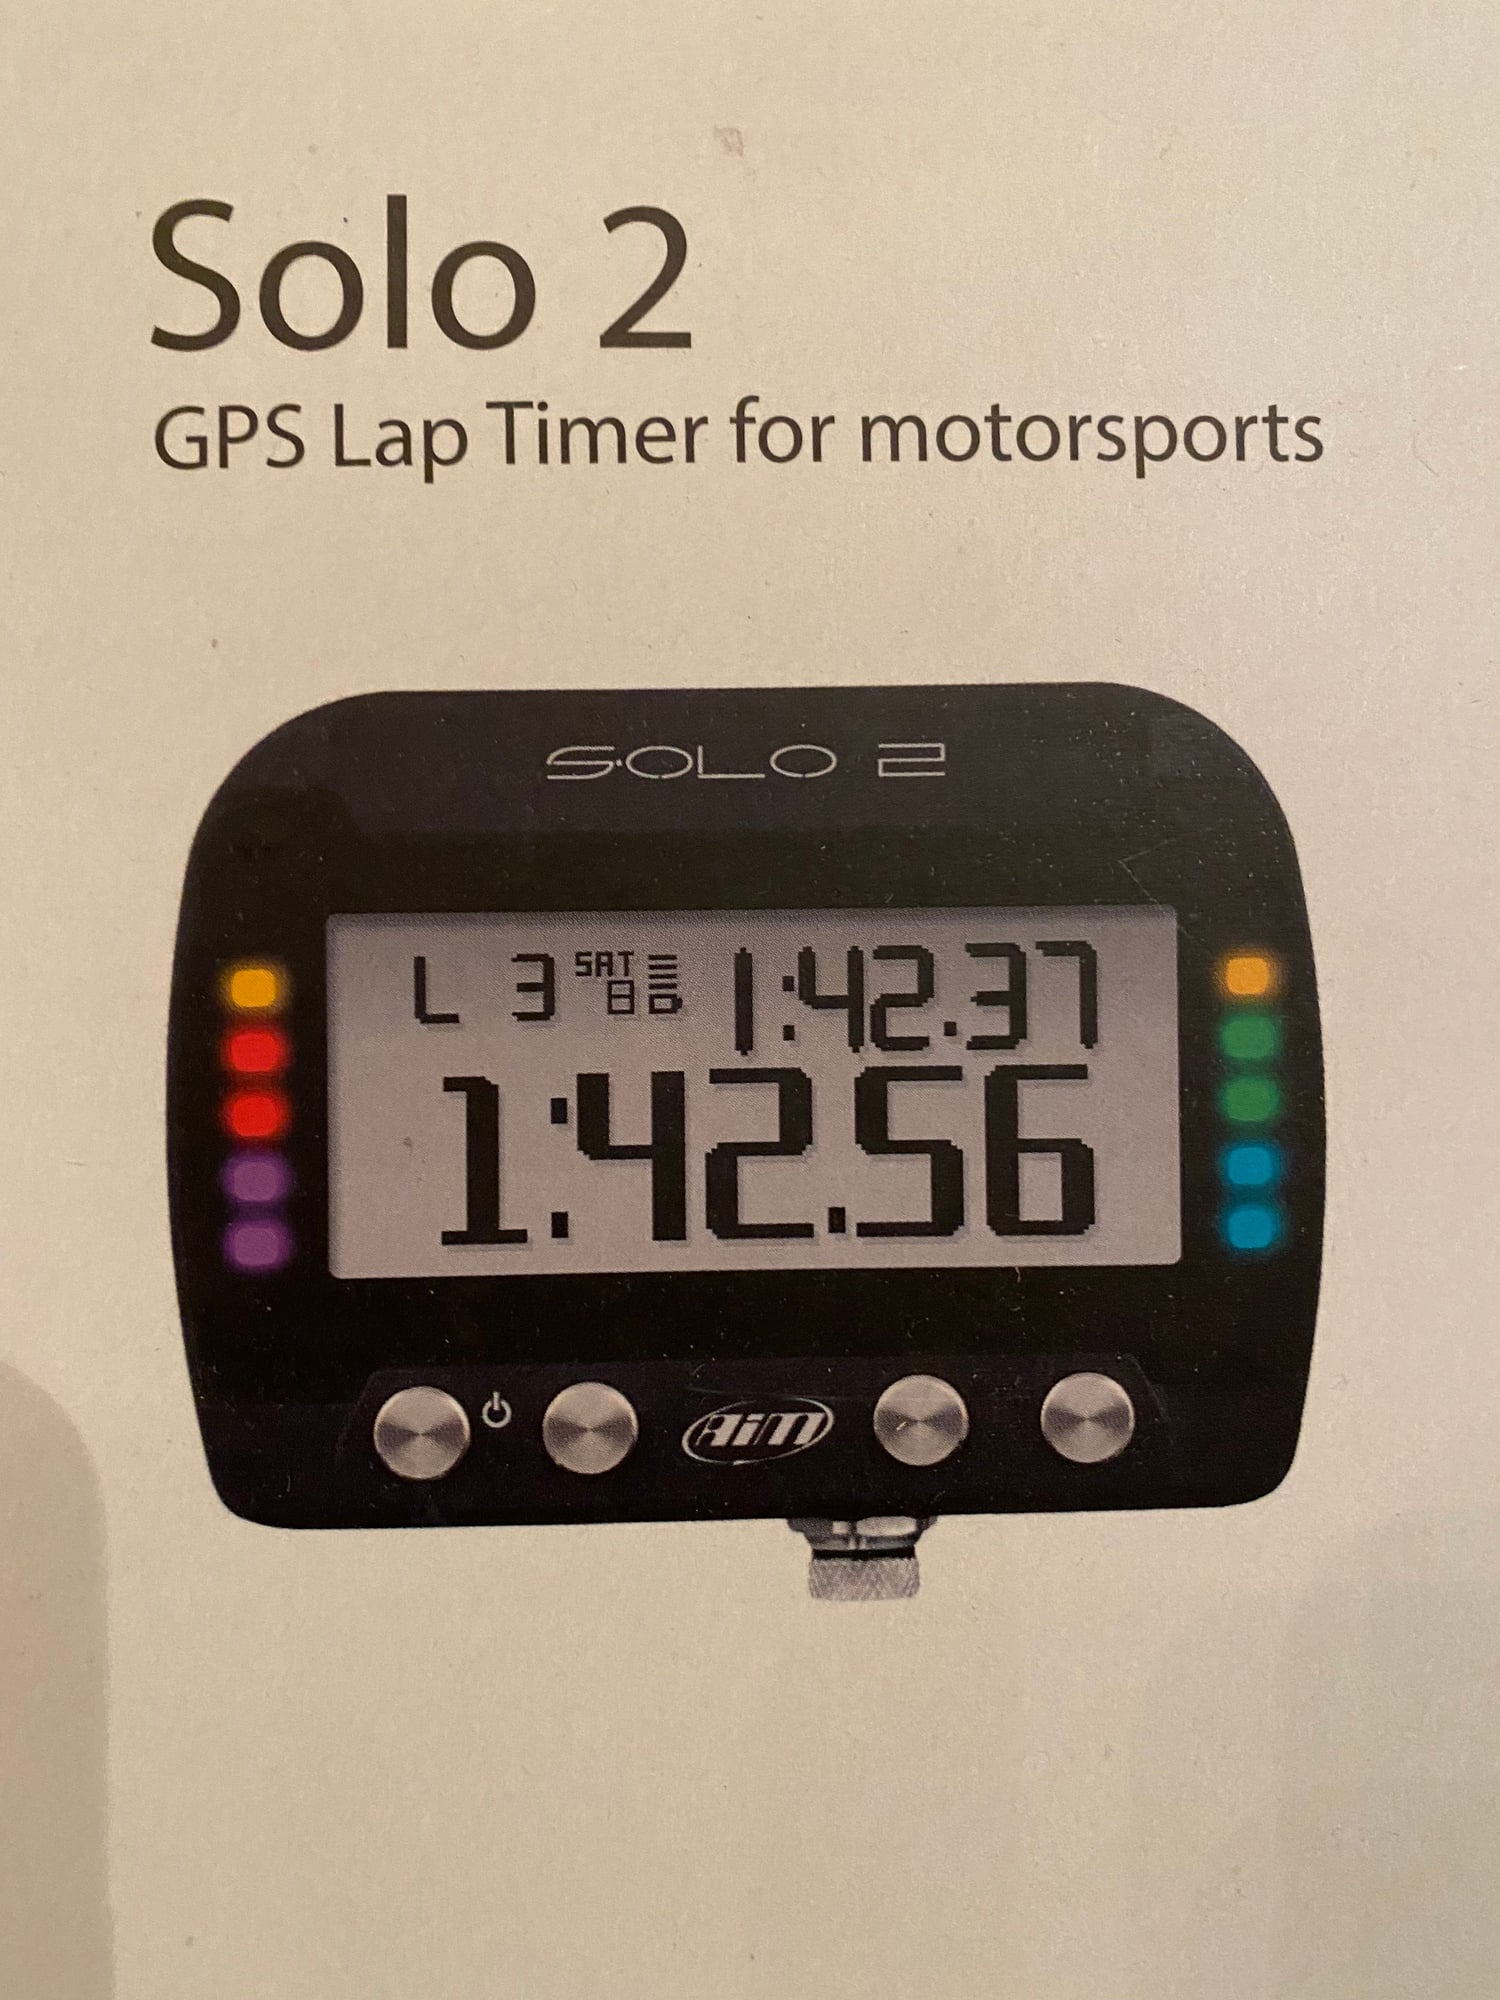 Miscellaneous - SOLO 2 LAP TIMER - Used - 0  All Models - Houston, TX 77025, United States